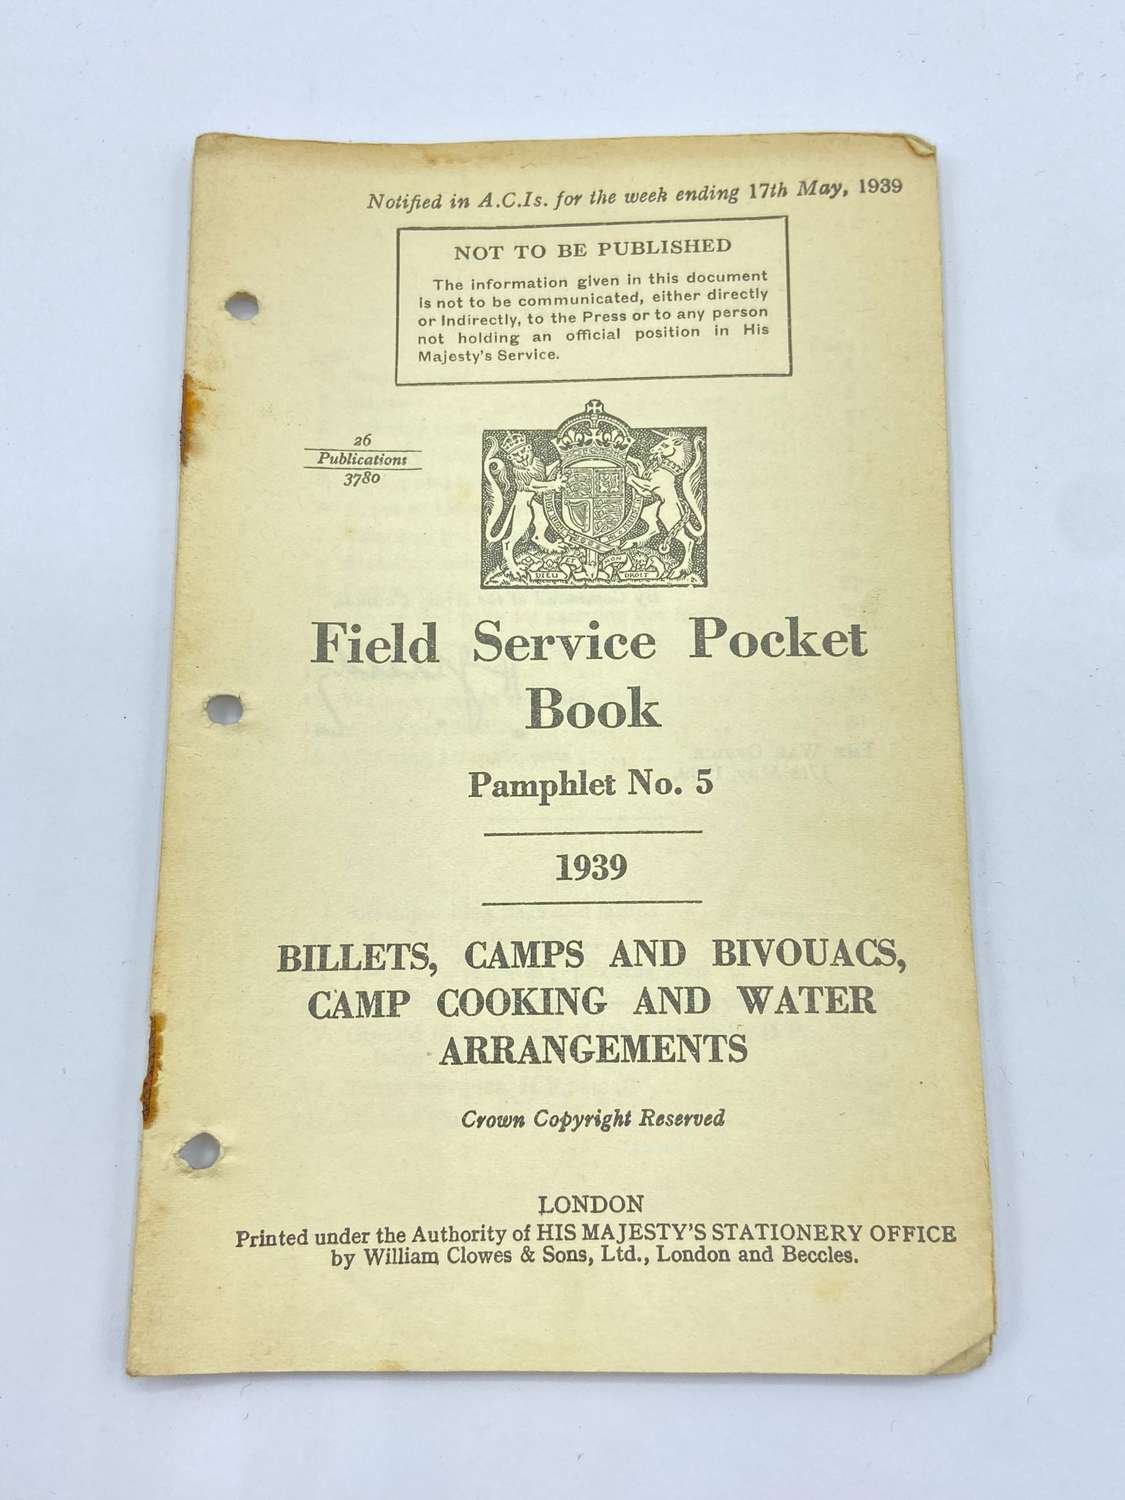 WW2 Field Service Pocket Book Billets, Camps & Bivouacs, Camp Cooking